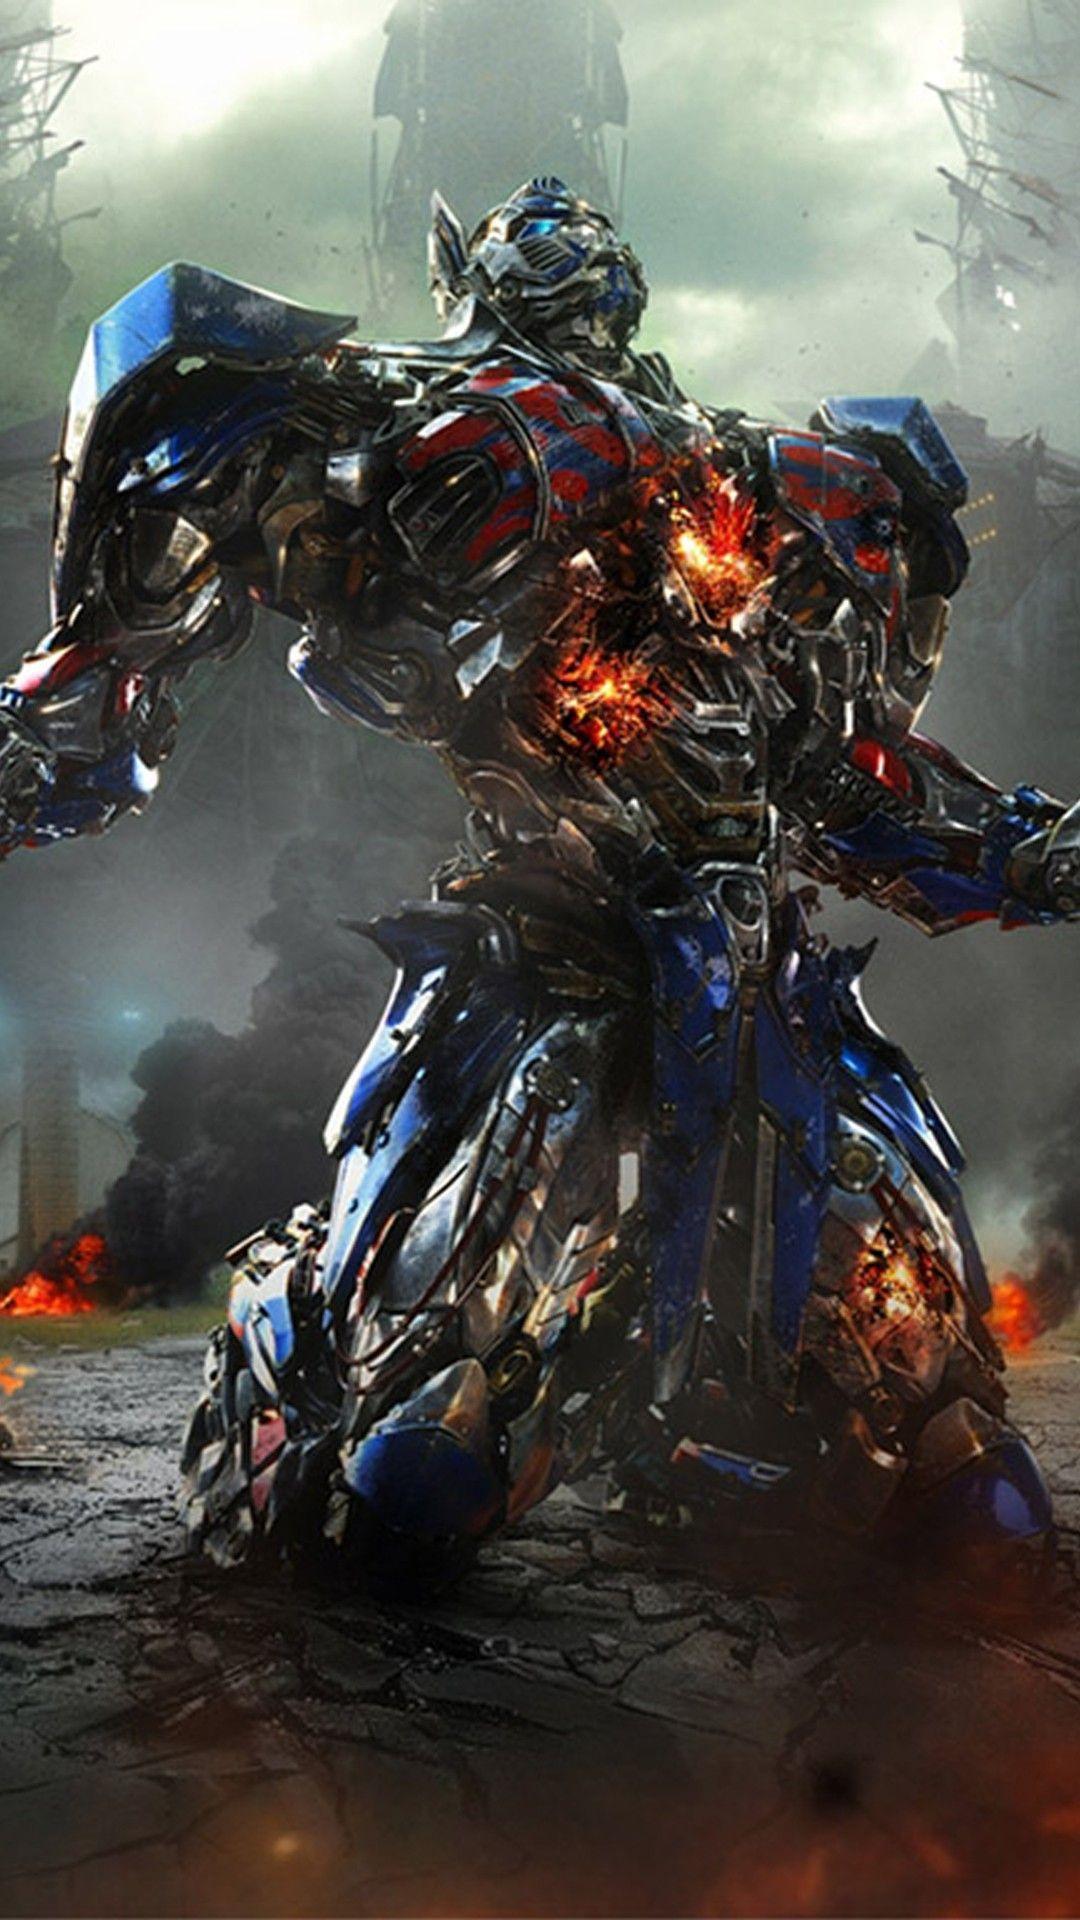 Transformers Optimus Prime HD Wallpapers For Mobile